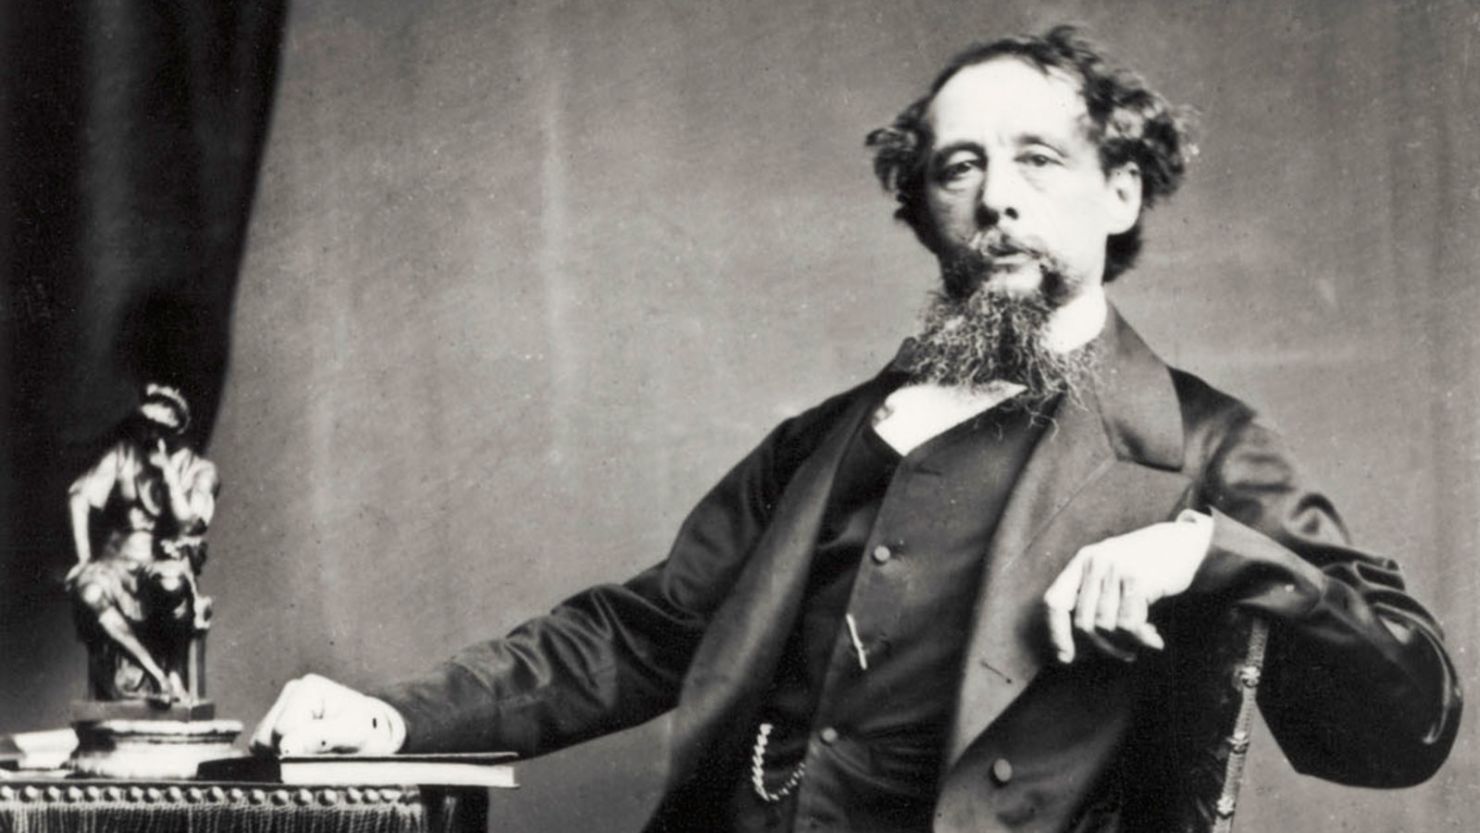 British novelist Charles Dickens missed out on his last Christmas turkey, a newly discovered letter reveals.